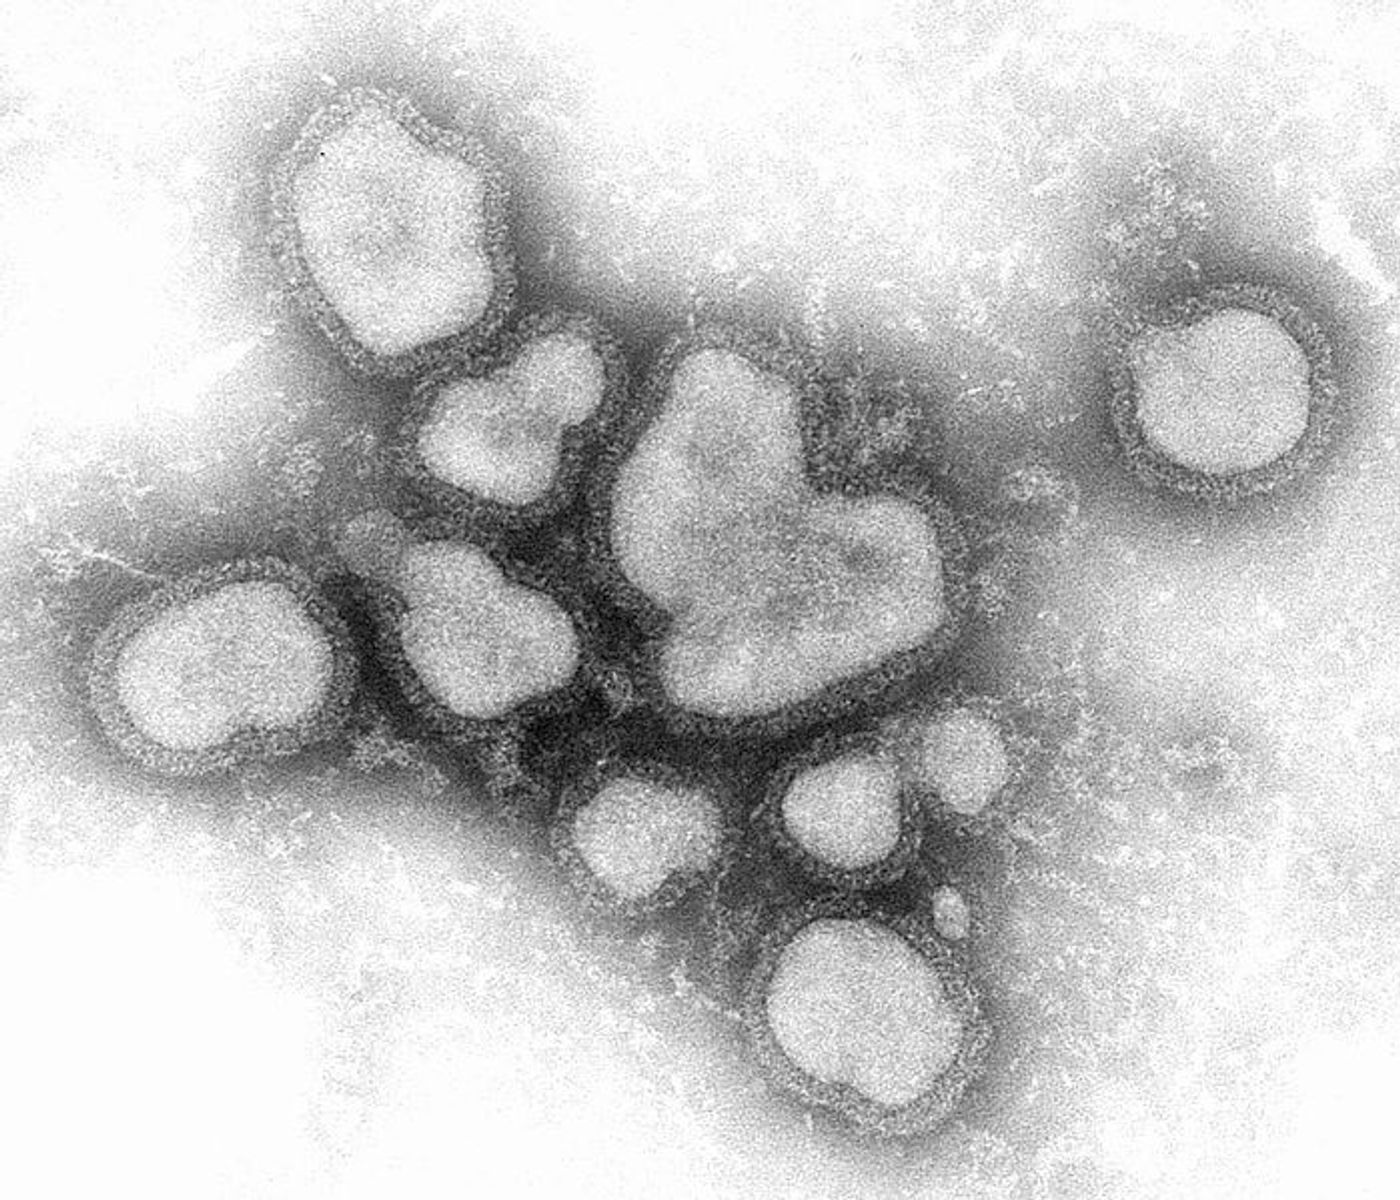 A transmission electron micrograph, negative stain image of the influenza A virus. Credit: CDC